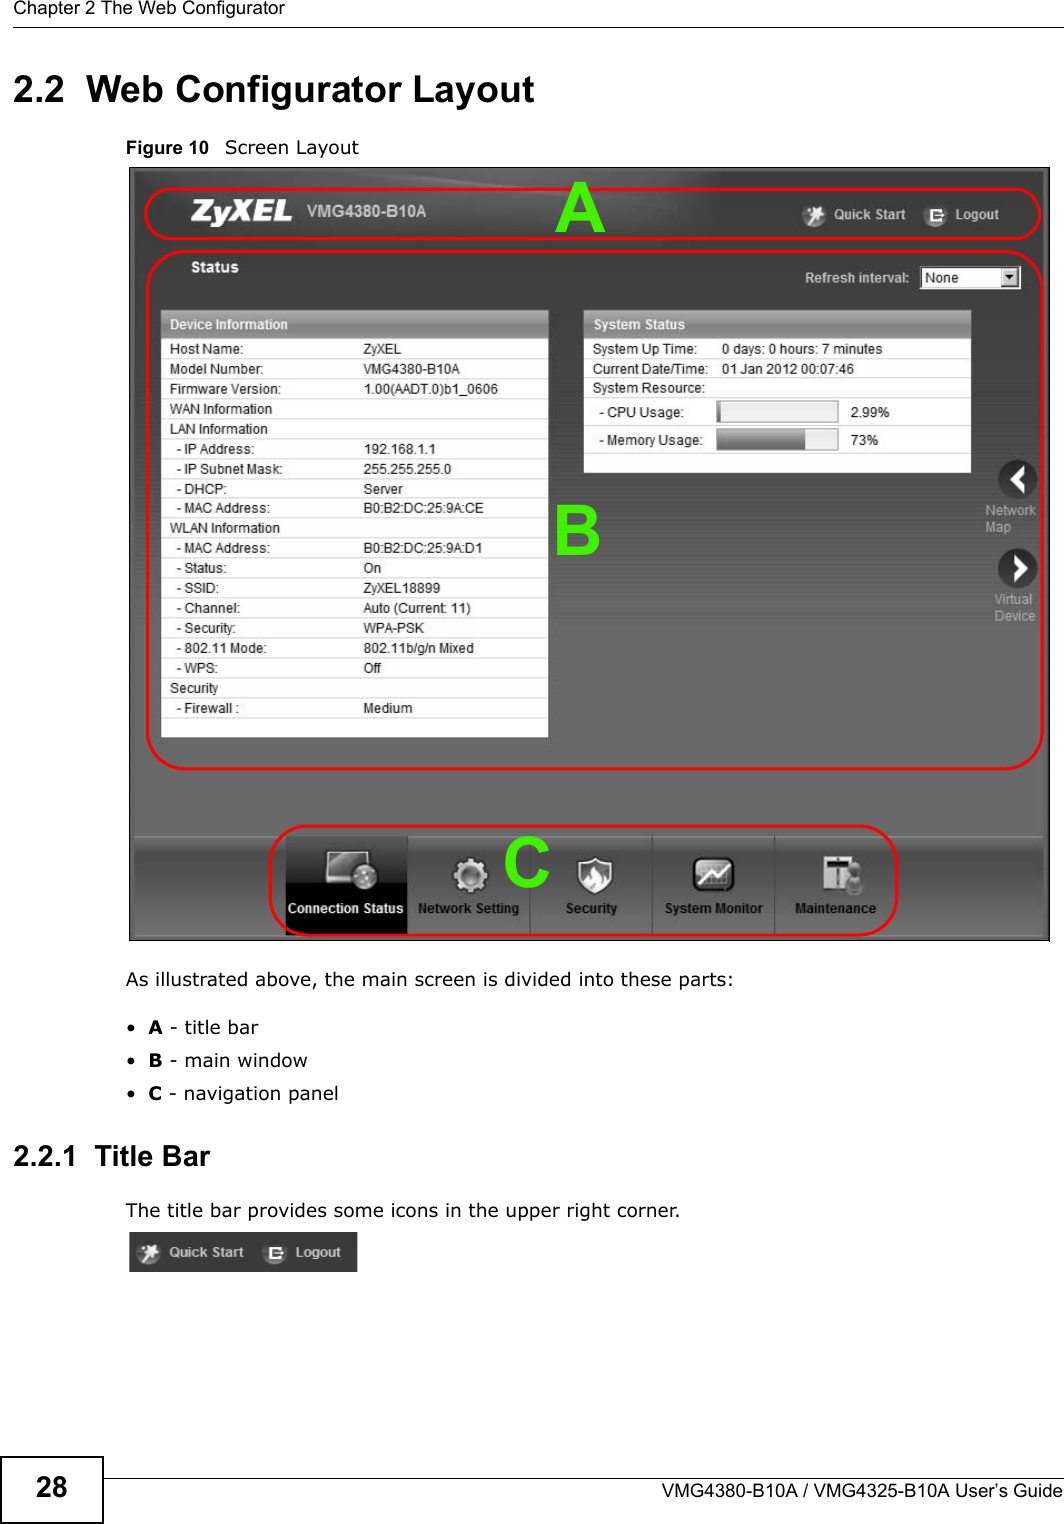 Chapter 2 The Web ConfiguratorVMG4380-B10A / VMG4325-B10A User’s Guide282.2  Web Configurator LayoutFigure 10   Screen LayoutAs illustrated above, the main screen is divided into these parts:•A - title bar•B - main window•C - navigation panel2.2.1  Title BarThe title bar provides some icons in the upper right corner.BCA